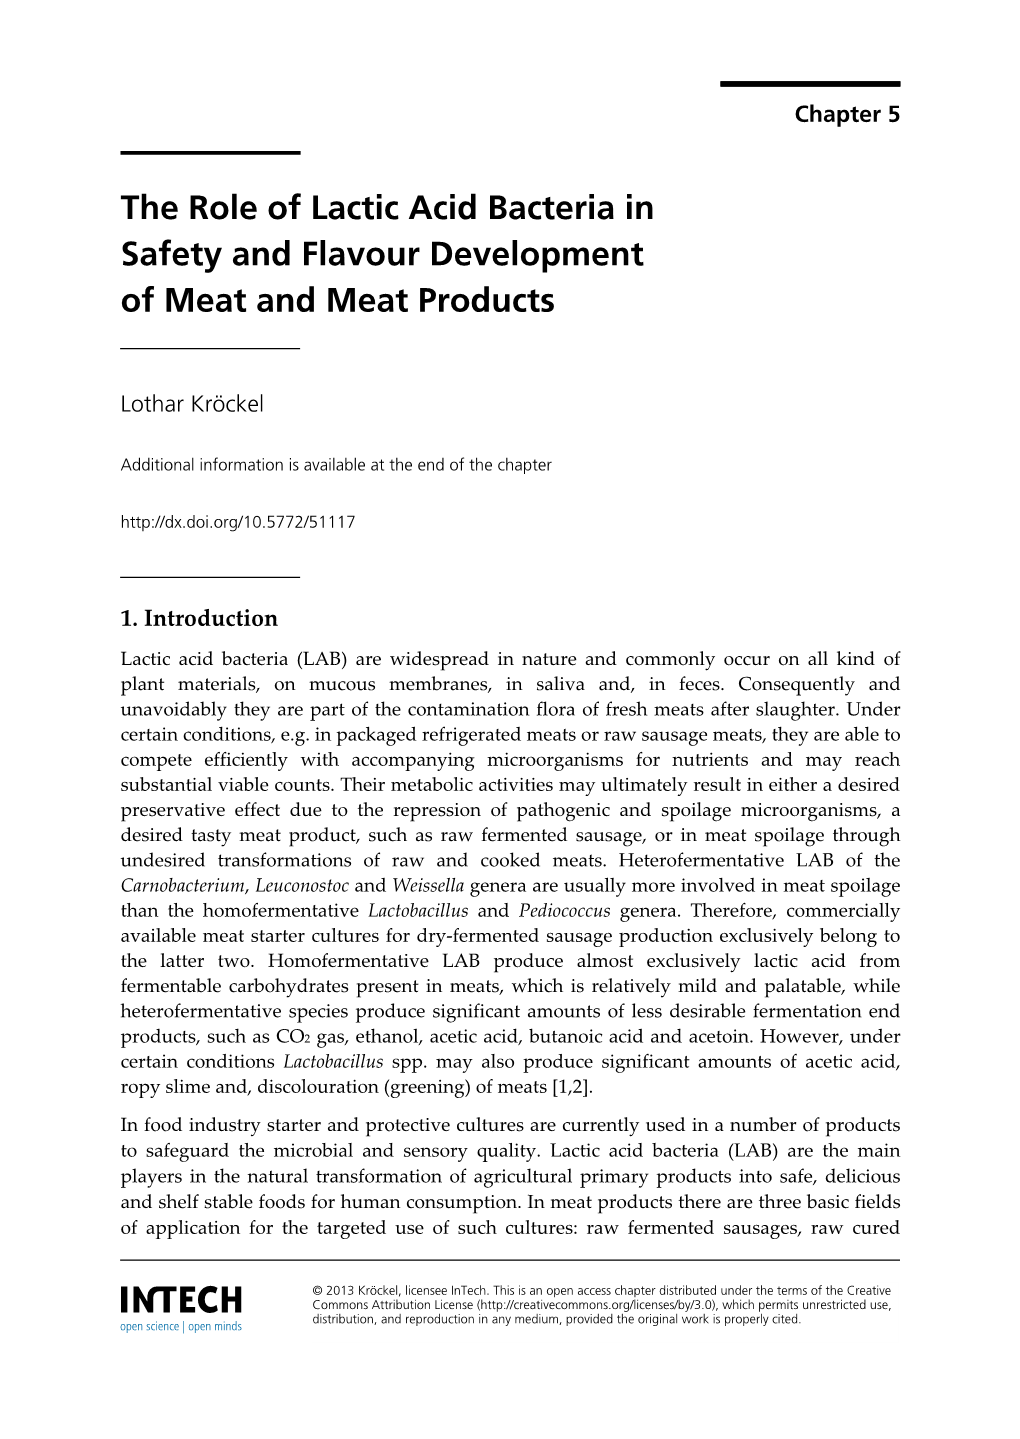 The Role of Lactic Acid Bacteria in Safety and Flavour Development of Meat and Meat Products